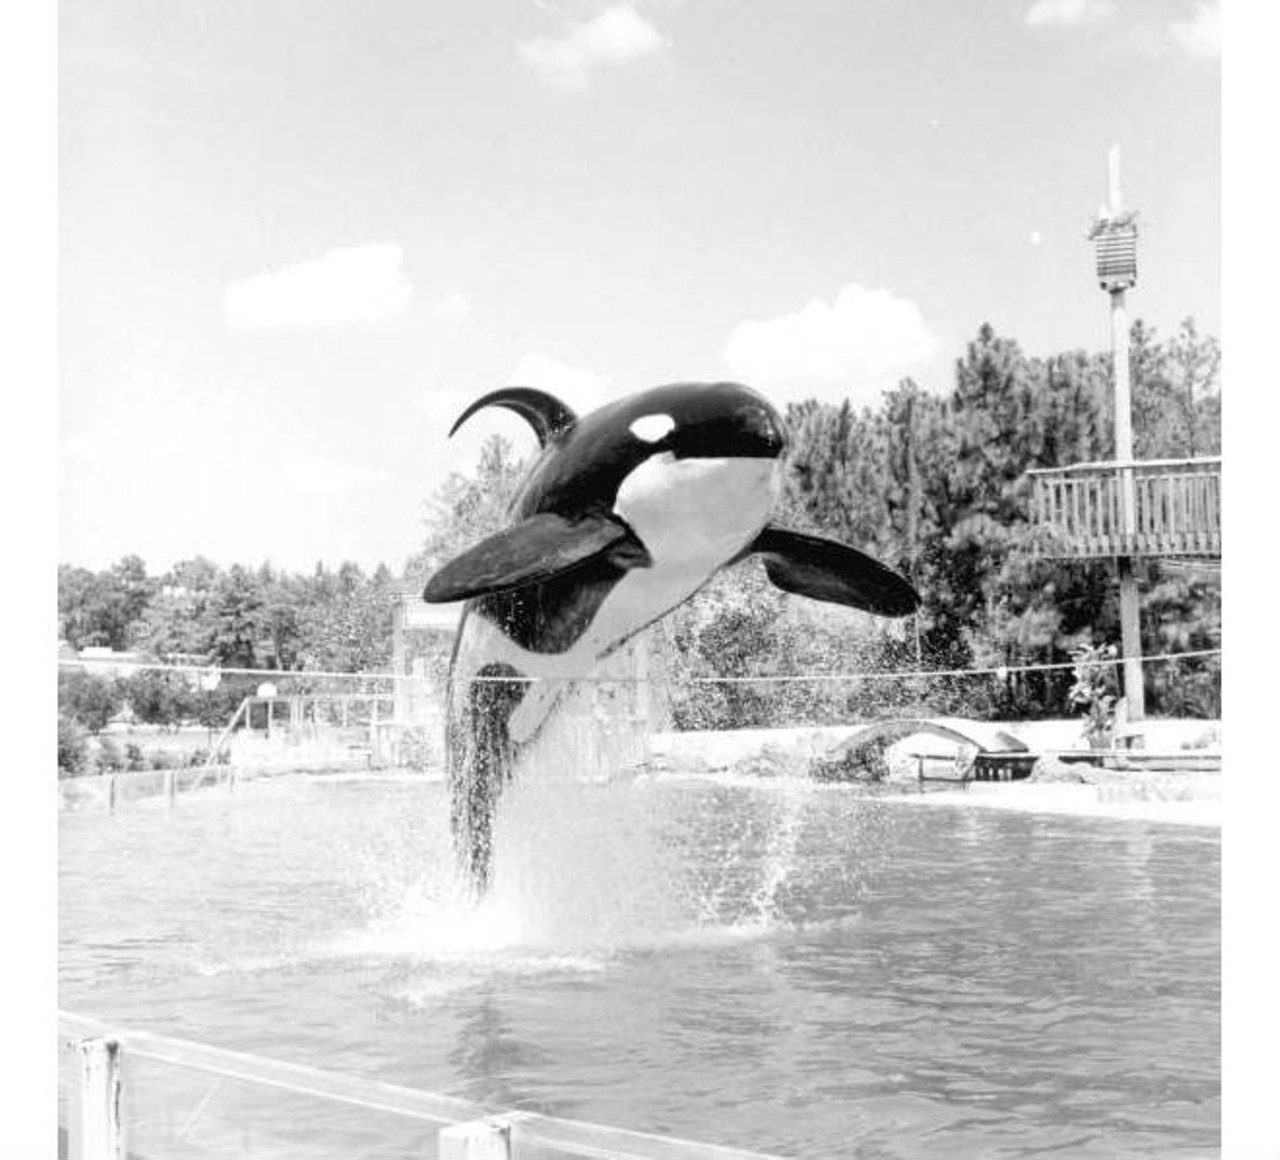 Killer whale jumping out and over a rope in Sea World